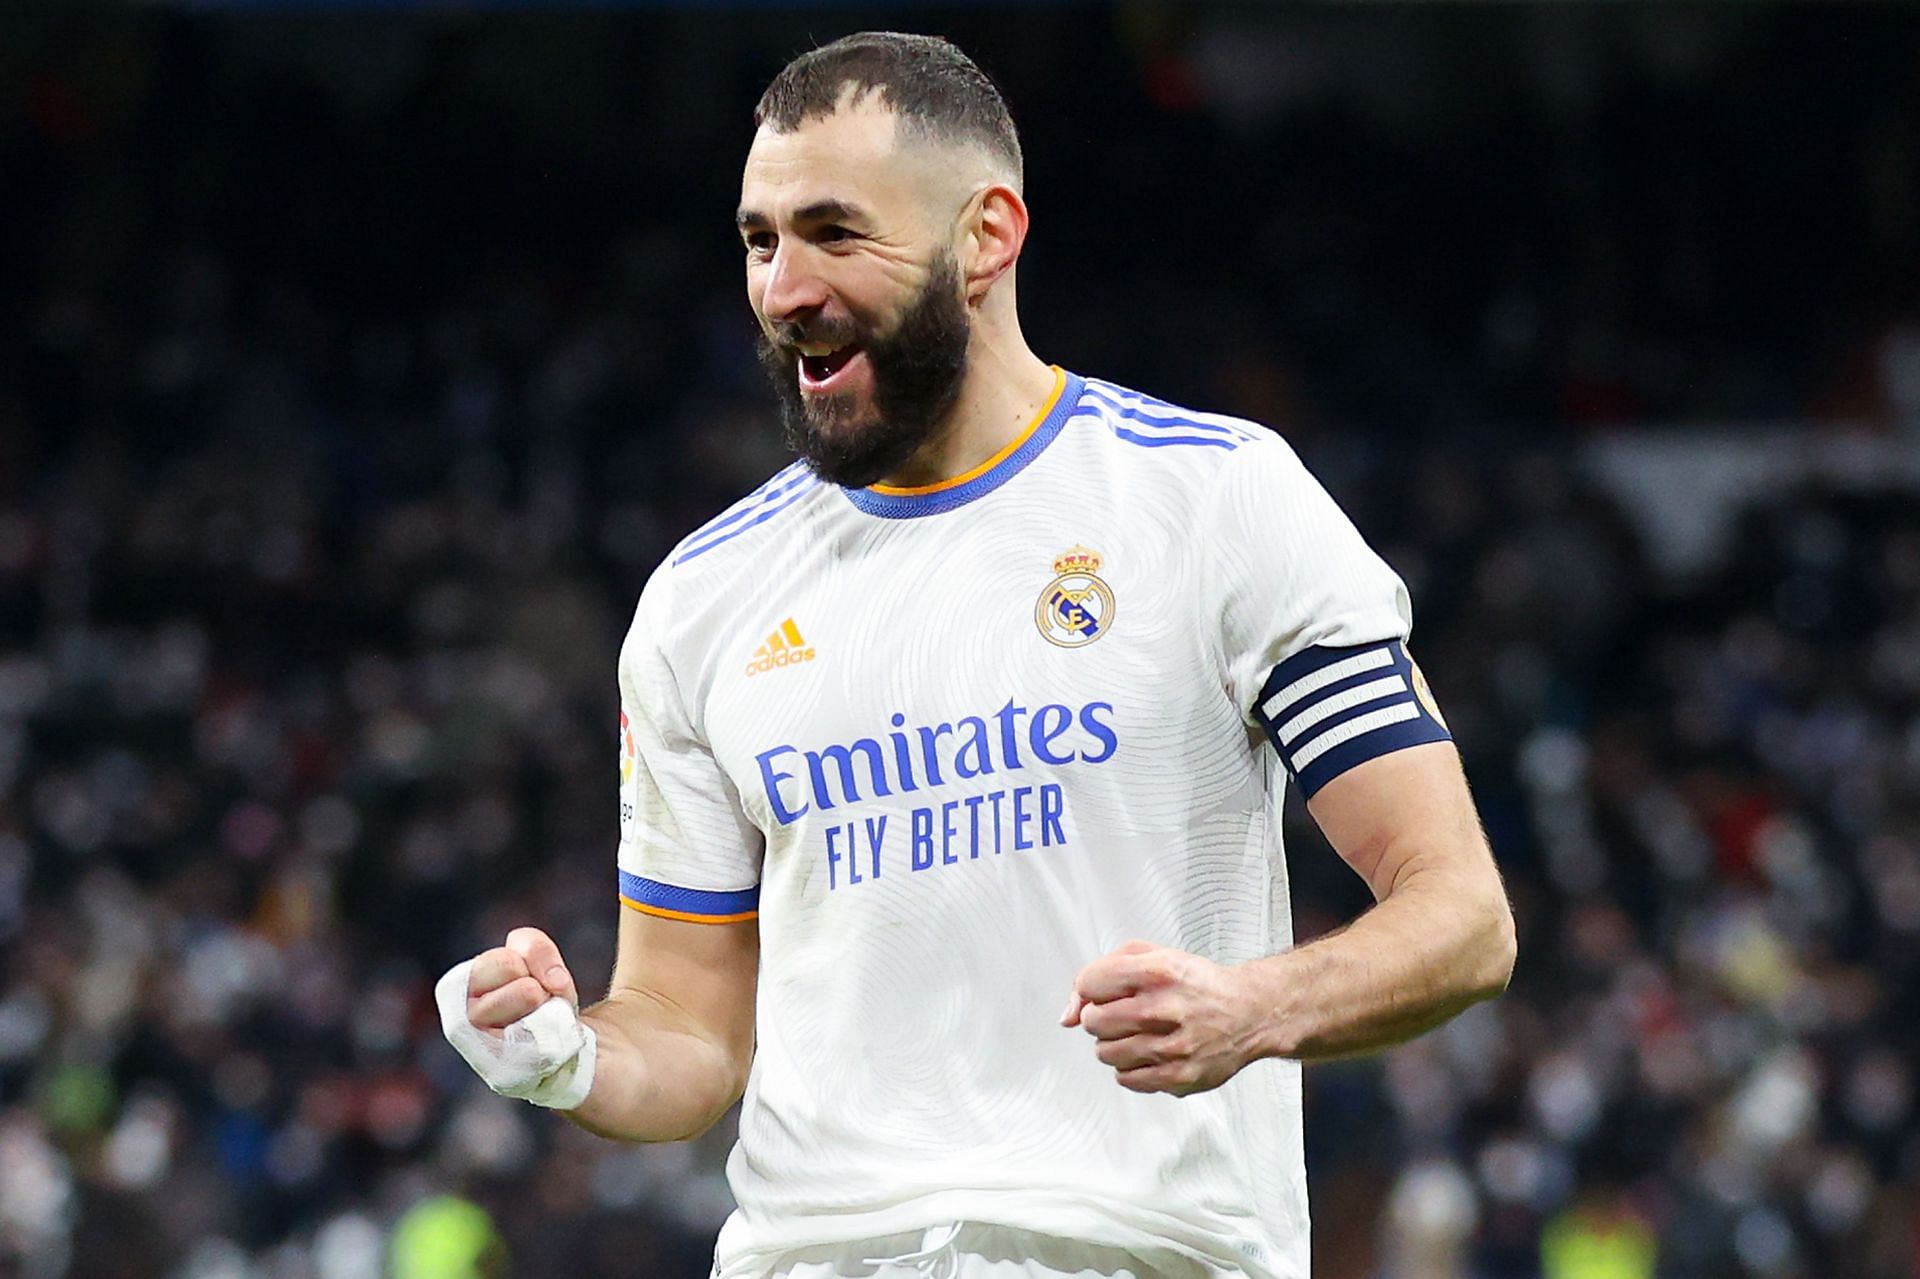 Carlo Ancelotti is still cautious about Karim Benzema's opportunity to be introduced in the match against PSG.